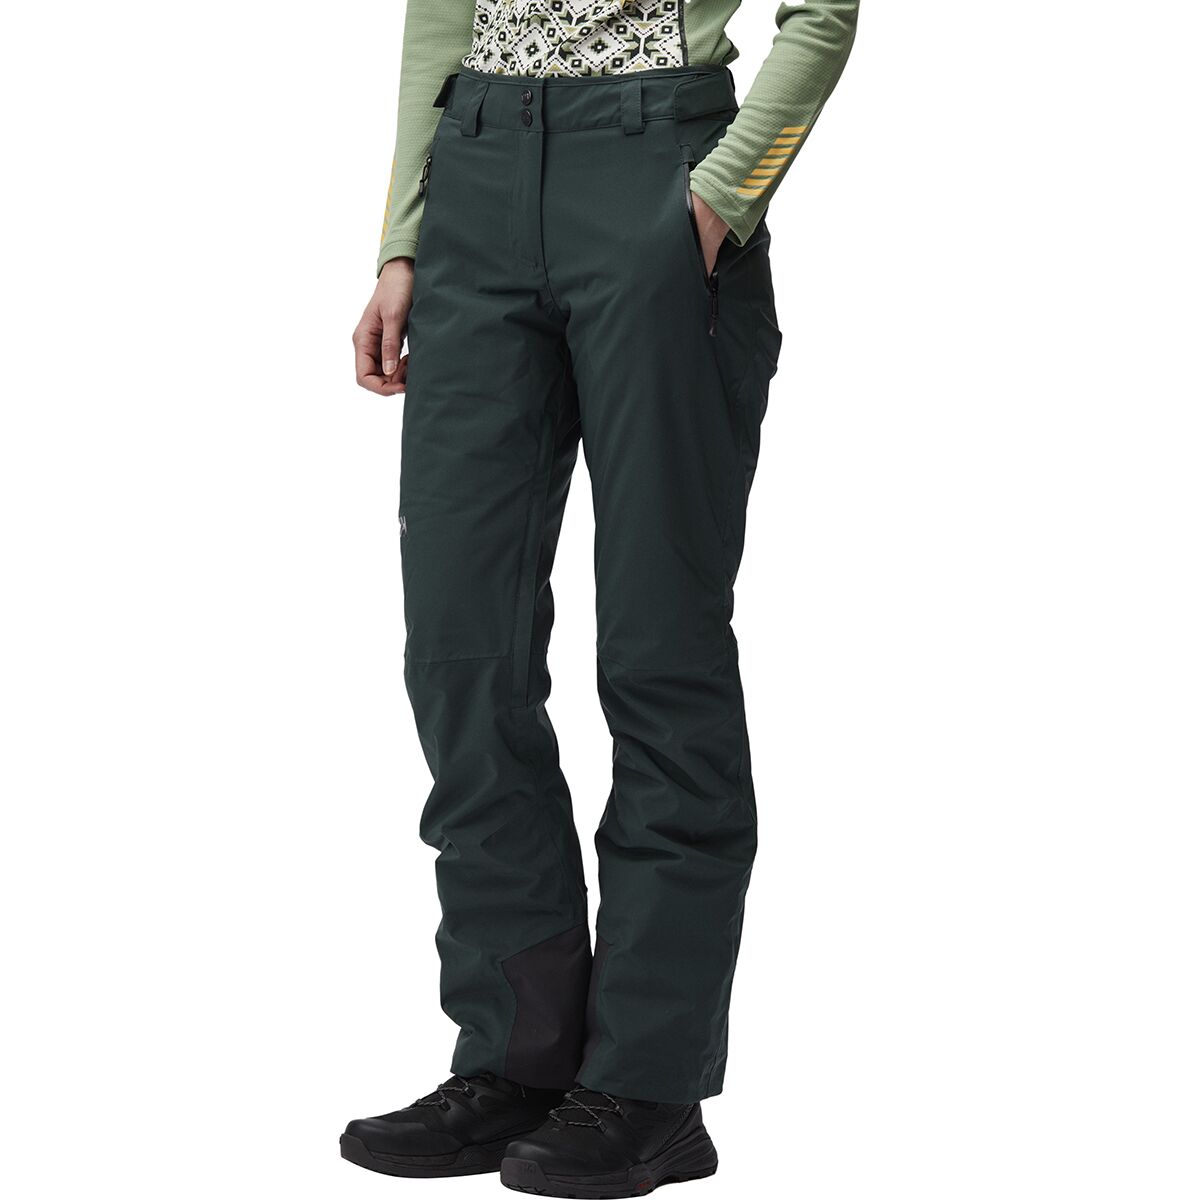 Helly Hansen Legendary Insulated Pant - Women's - Clothing | Backcountry